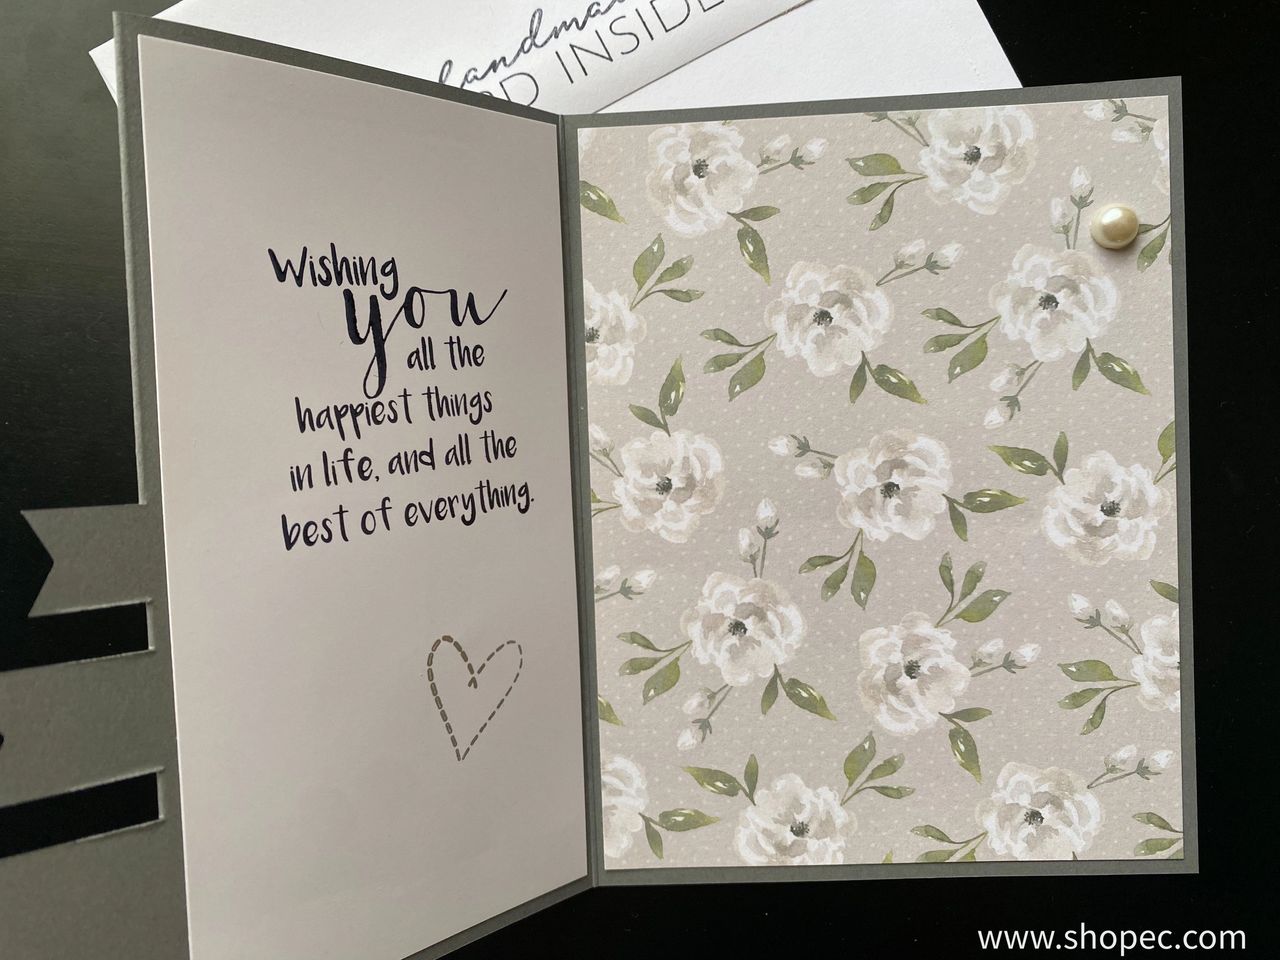 Triple flag card - inside. Right side has a gray floral pattern and left has a phrase “Wishing you all the happiest things in life, and all the best of everything.”